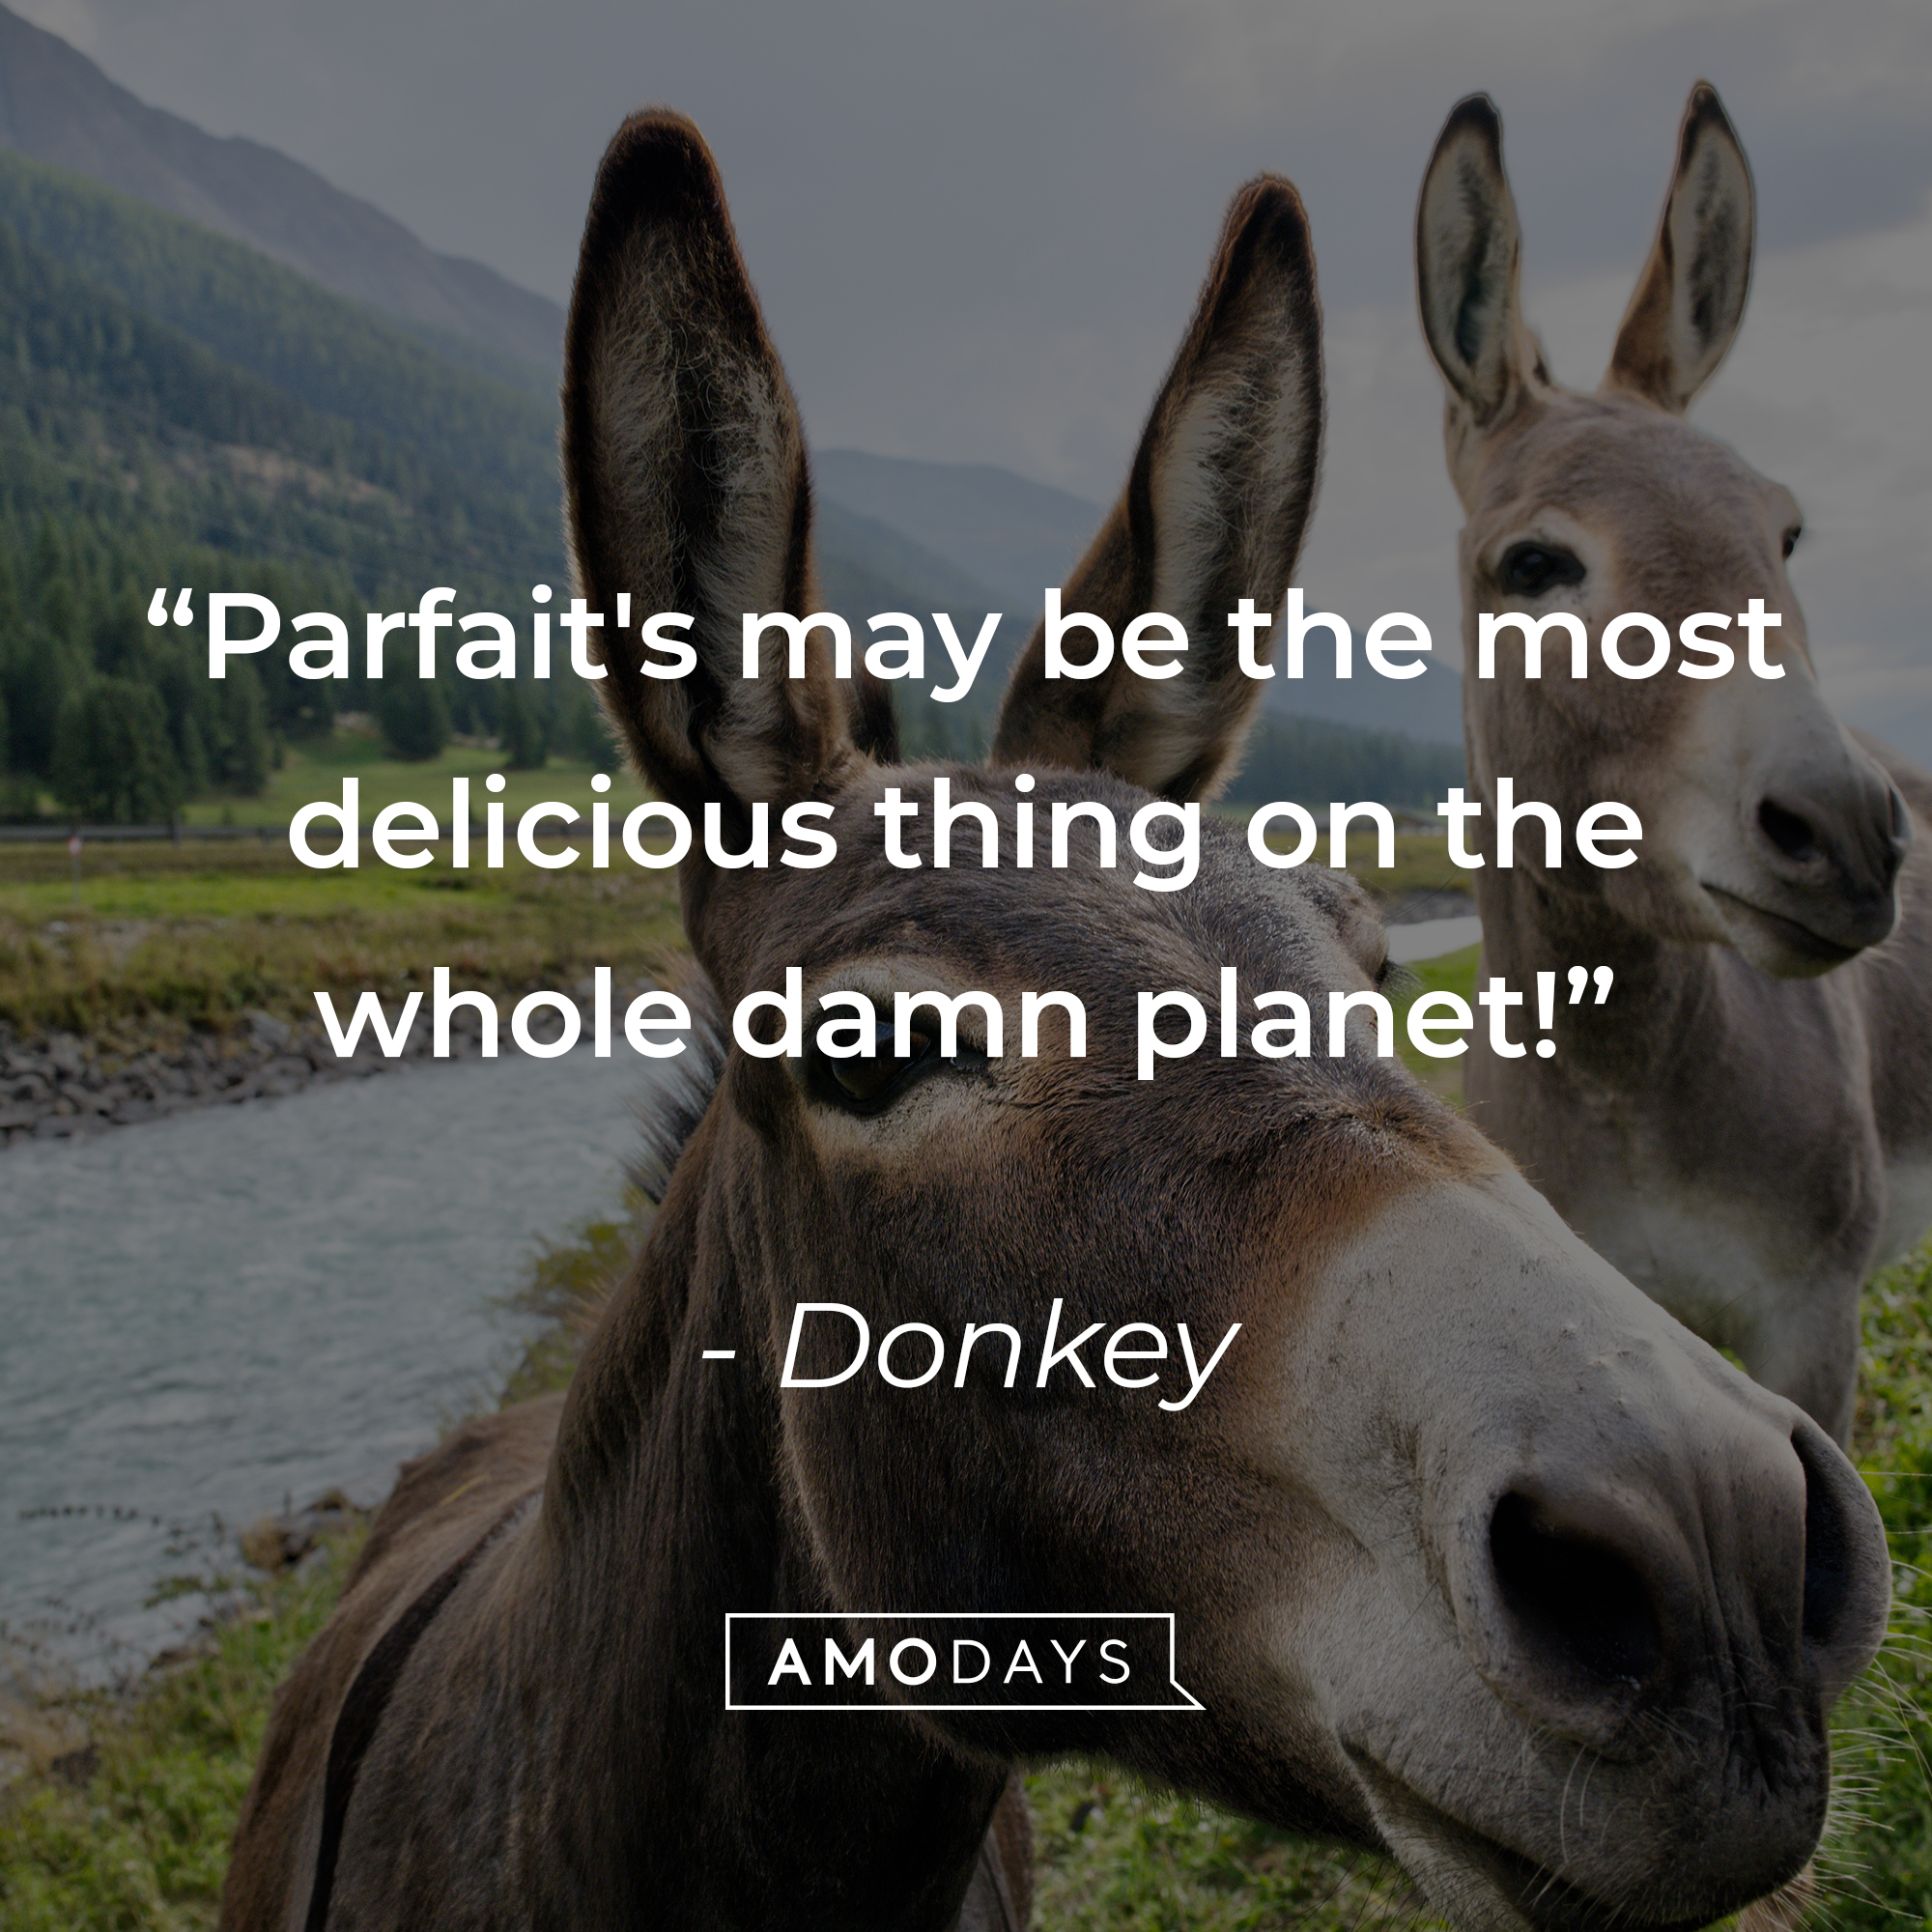 Donkey's quote: "Parfait's may be the most delicious thing on the whole damn planet!" | Source: Unsplash